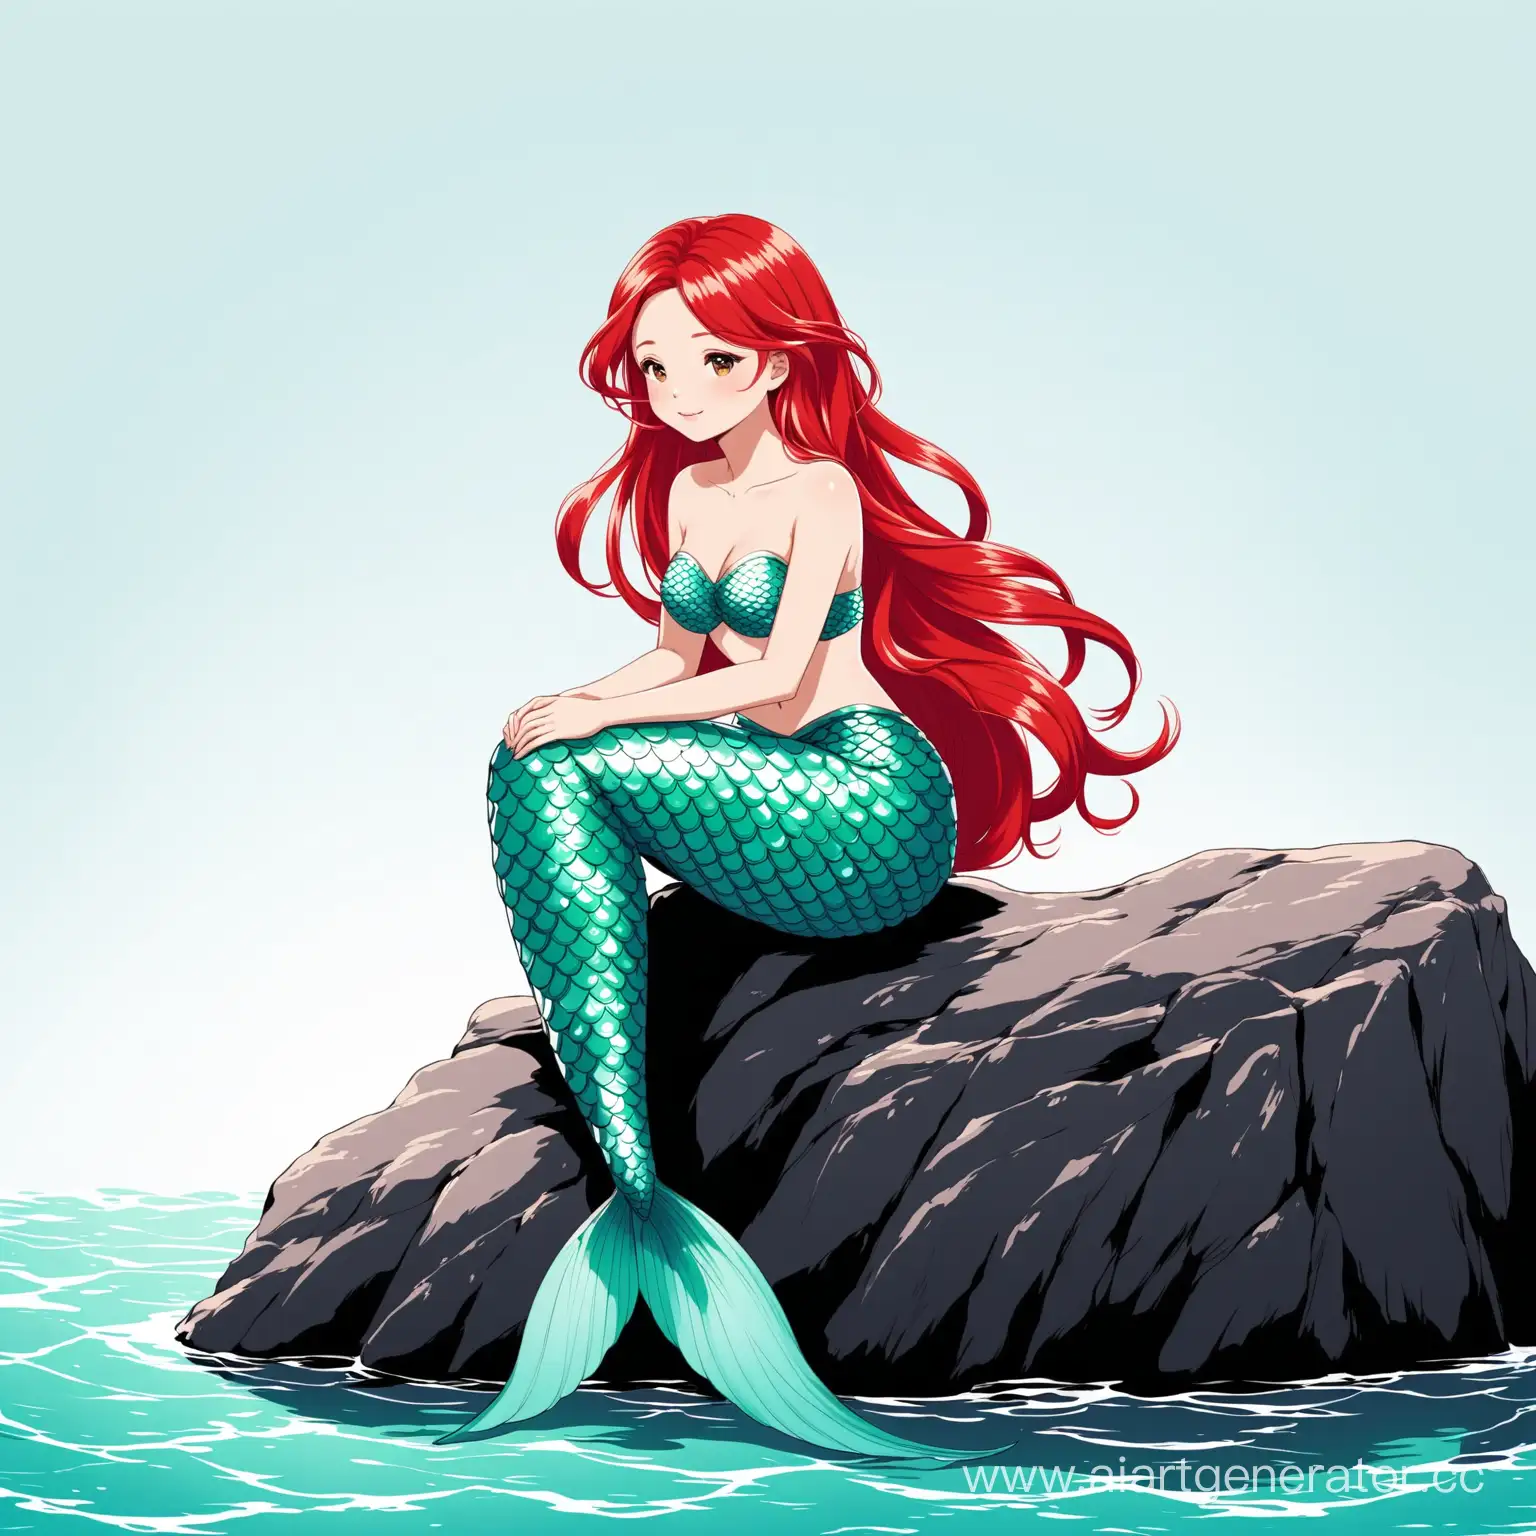 RedHaired-Mermaid-Sitting-on-White-Rock-Ethereal-Oceanic-Beauty